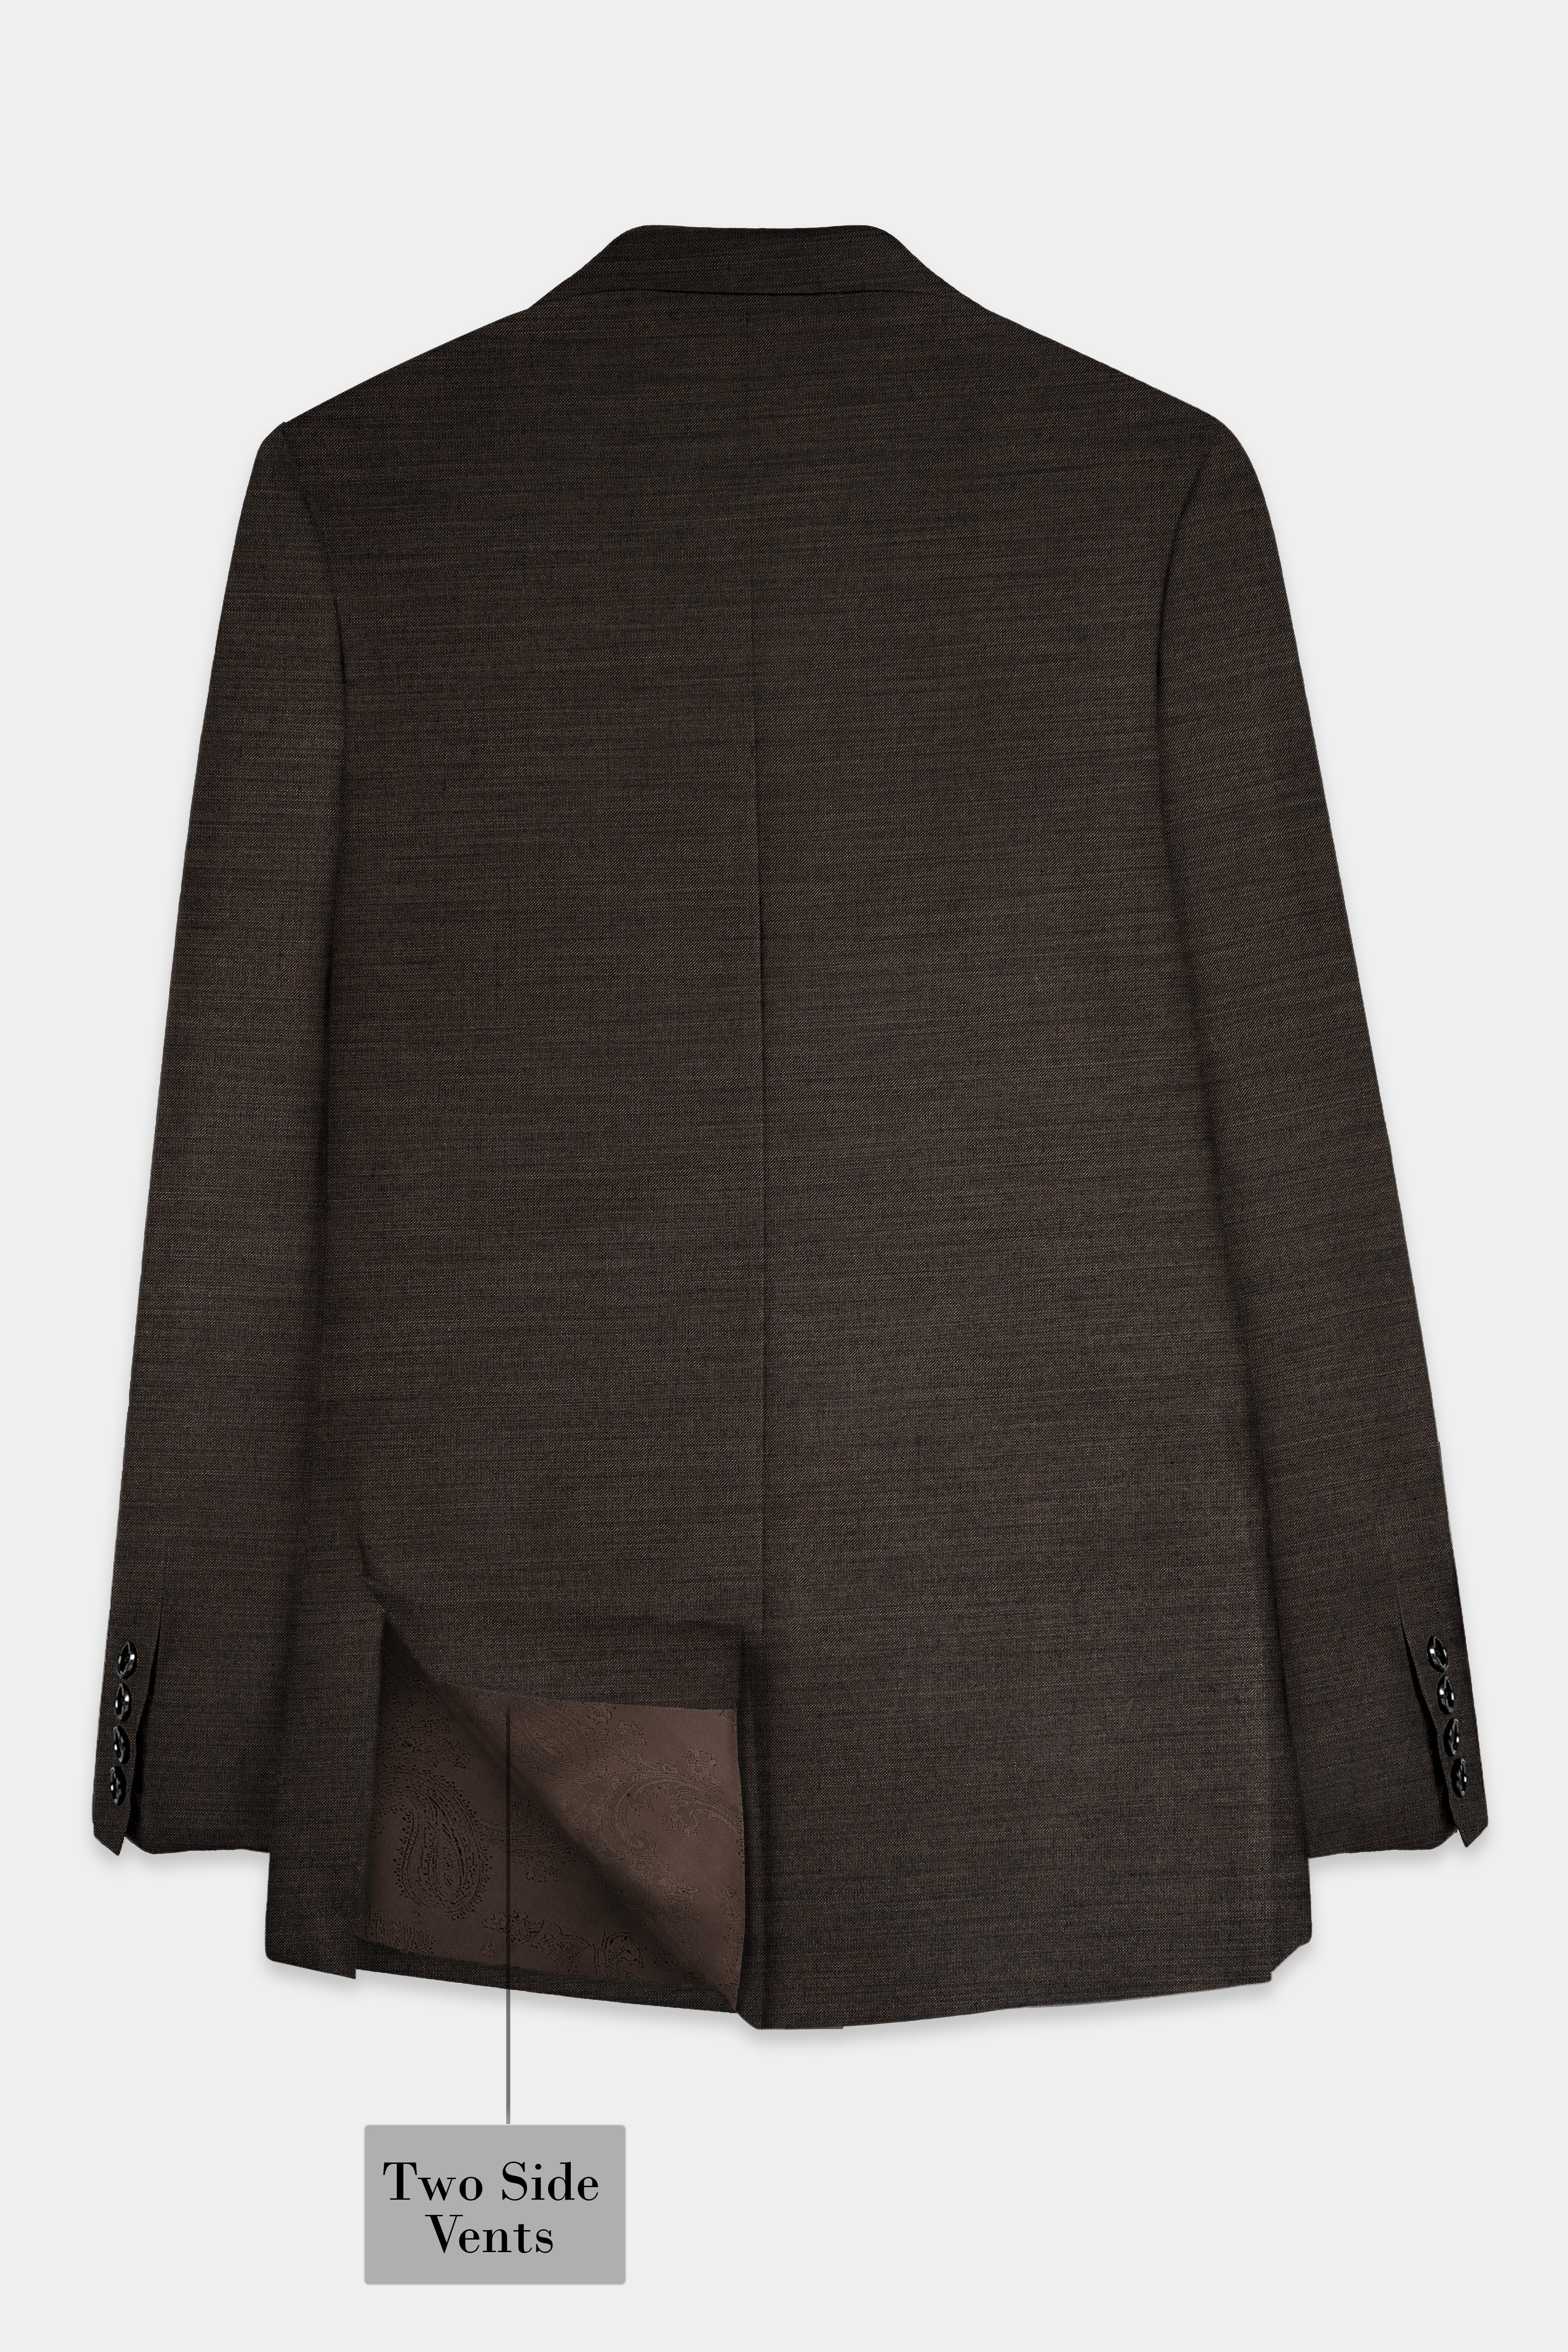 Eclipse Brown Textured Wool Blend Suit